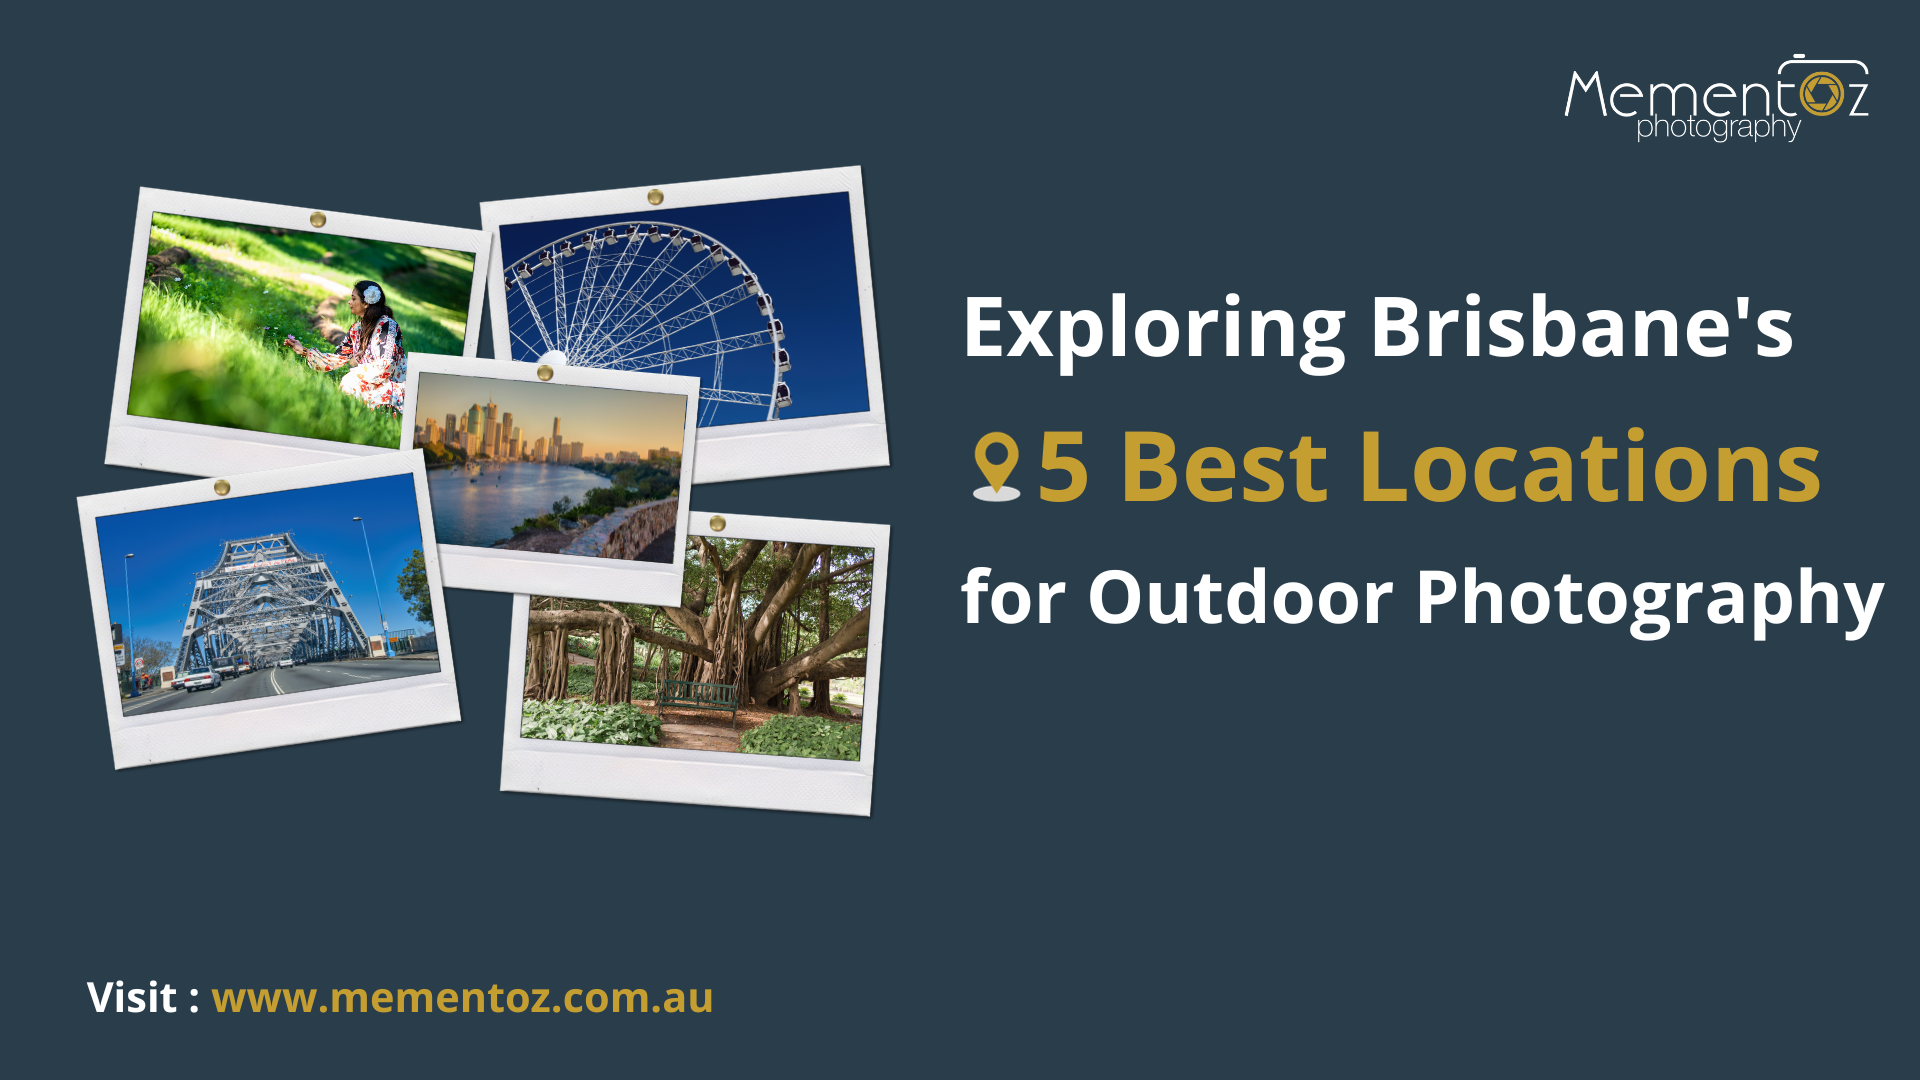 5 Best Locations for Outdoor Photography